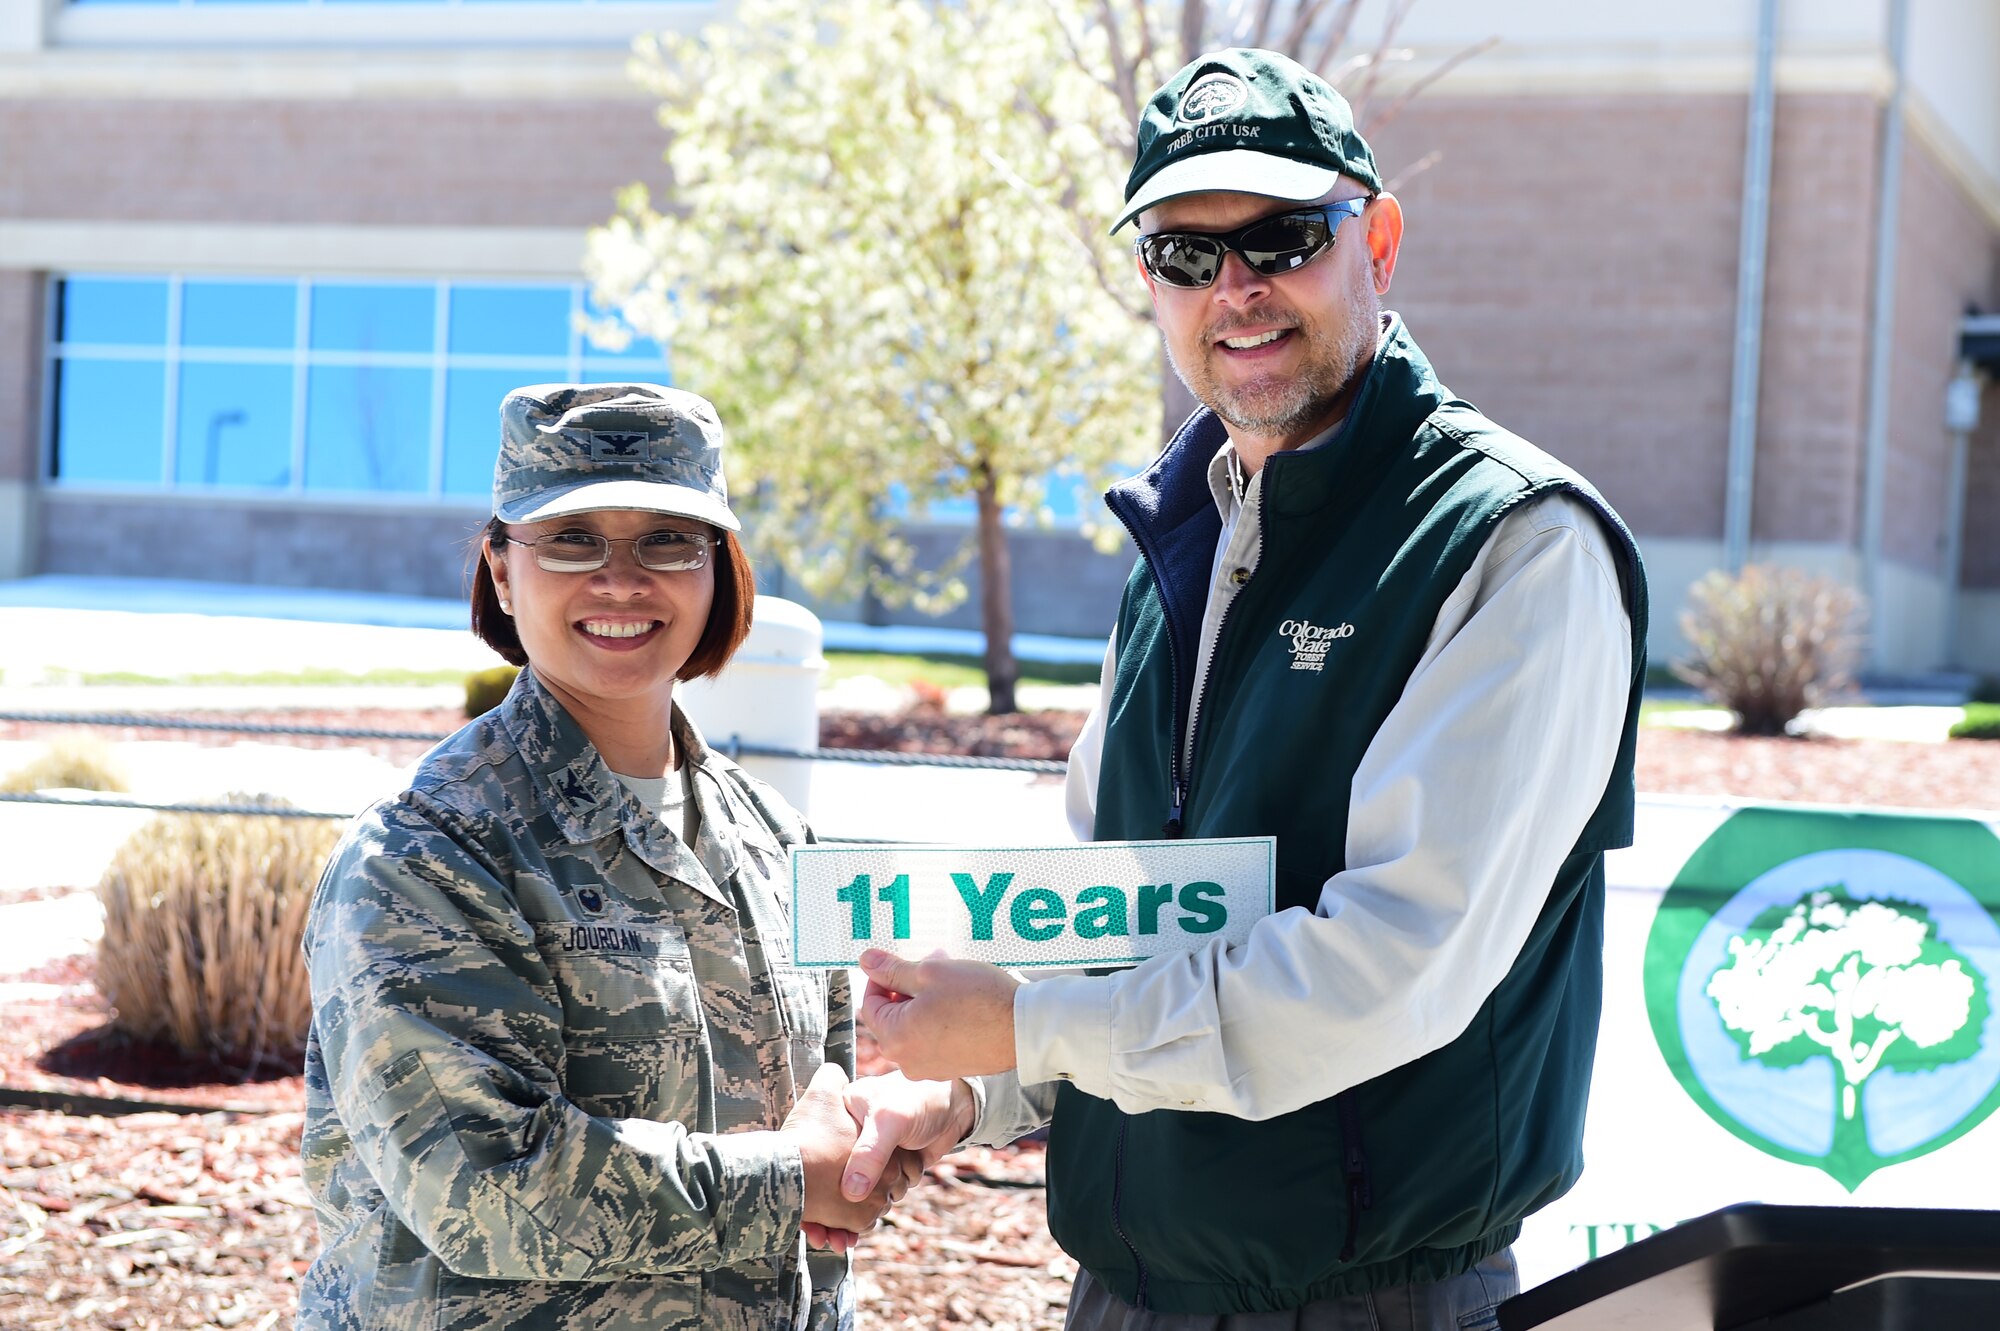 Col. Rose Jourdan, 460th Mission Support Group commander, receives a sticker from Keith Wood, forester for the Community Forestry Division Colorado State Service during an Earth and Arbor Day celebration April 21, 2016, on Buckley Air Force Base, Colo. This year celebrated Buckley’s 11th year of qualifying for Tree City USA, a nationwide movement that provides the framework necessary for communities to manage and expand their public trees. (U.S. Air Force photo by Senior Airman Racheal E. Watson/Released)